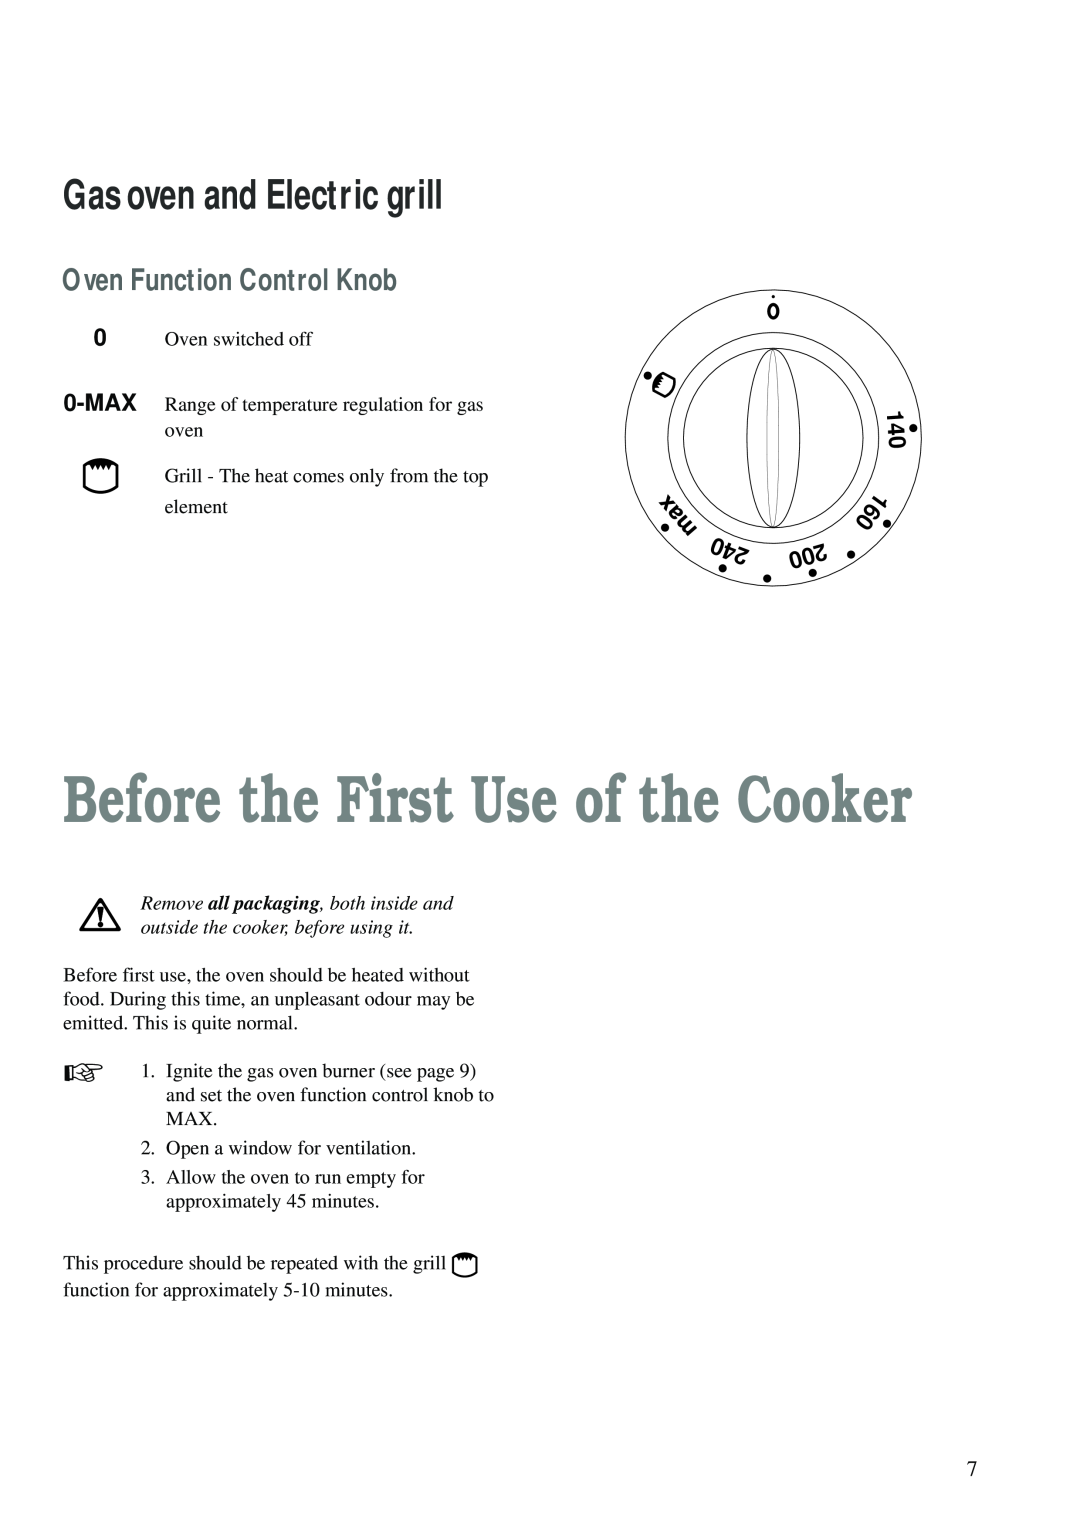 Electrolux CSIG 223 W manual Before the First Use of the Cooker, Gas oven and Electric grill, Oven Function Control Knob 